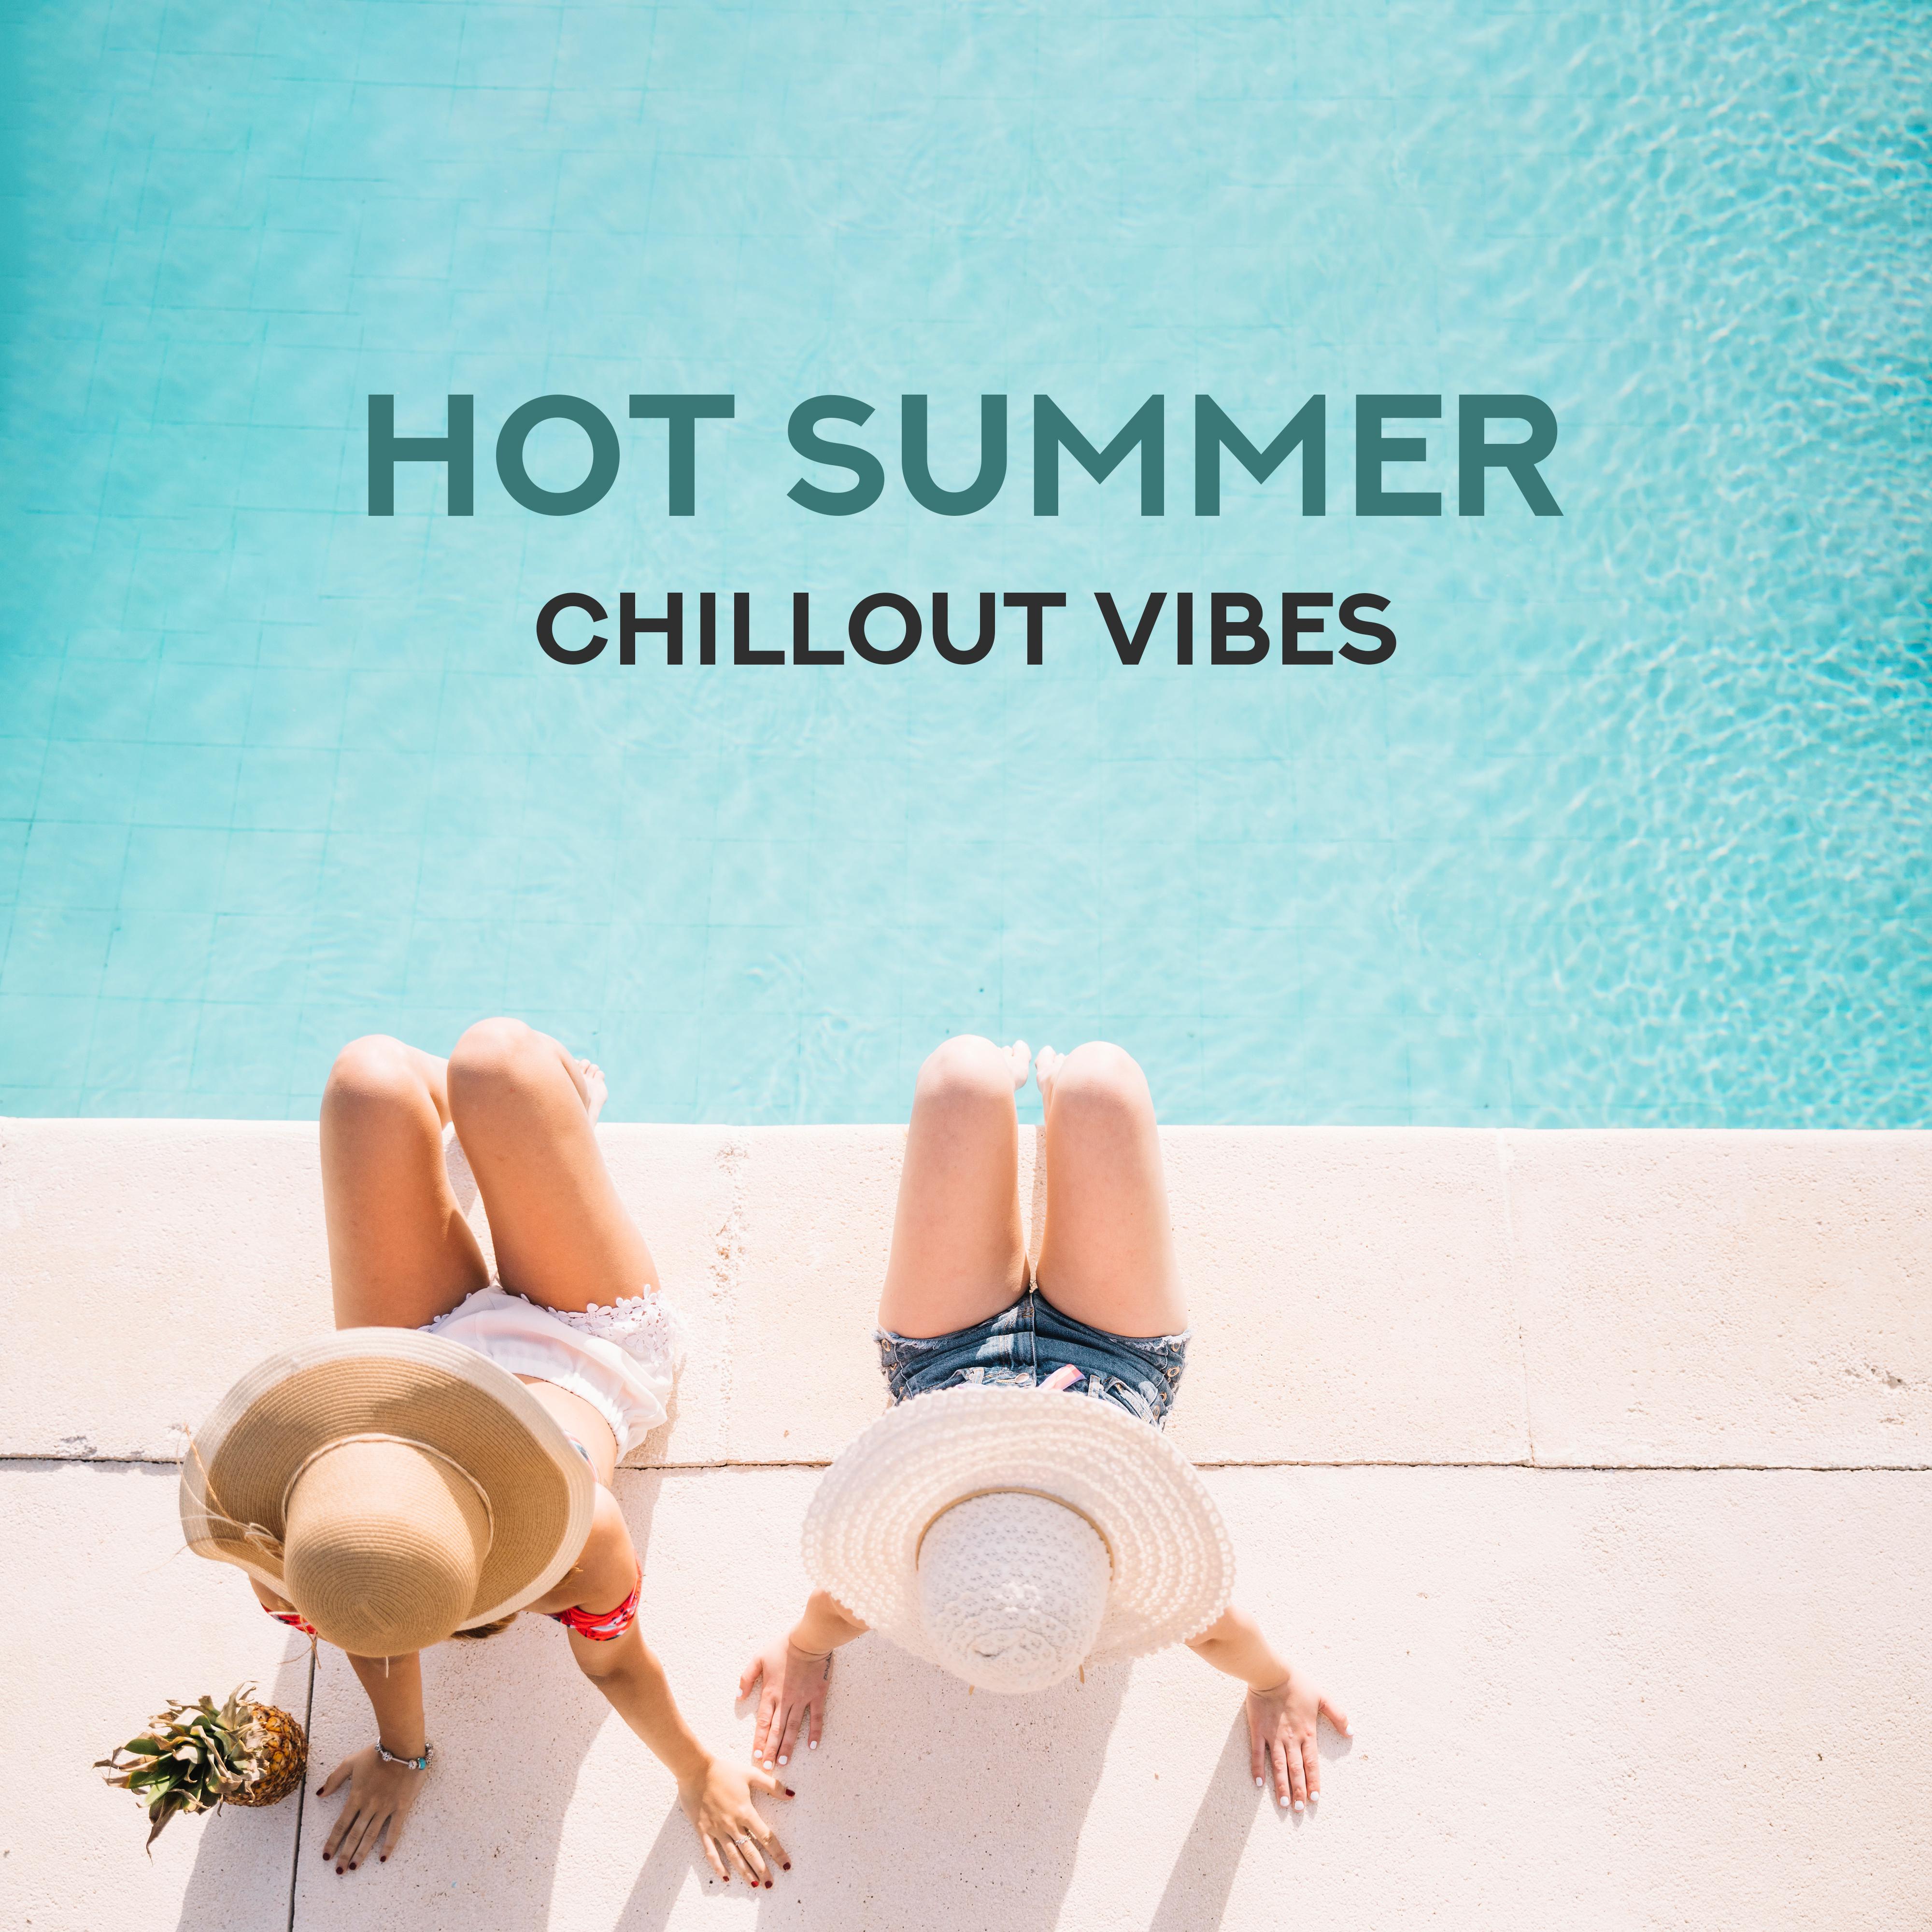 Hot Summer Chillout Vibes